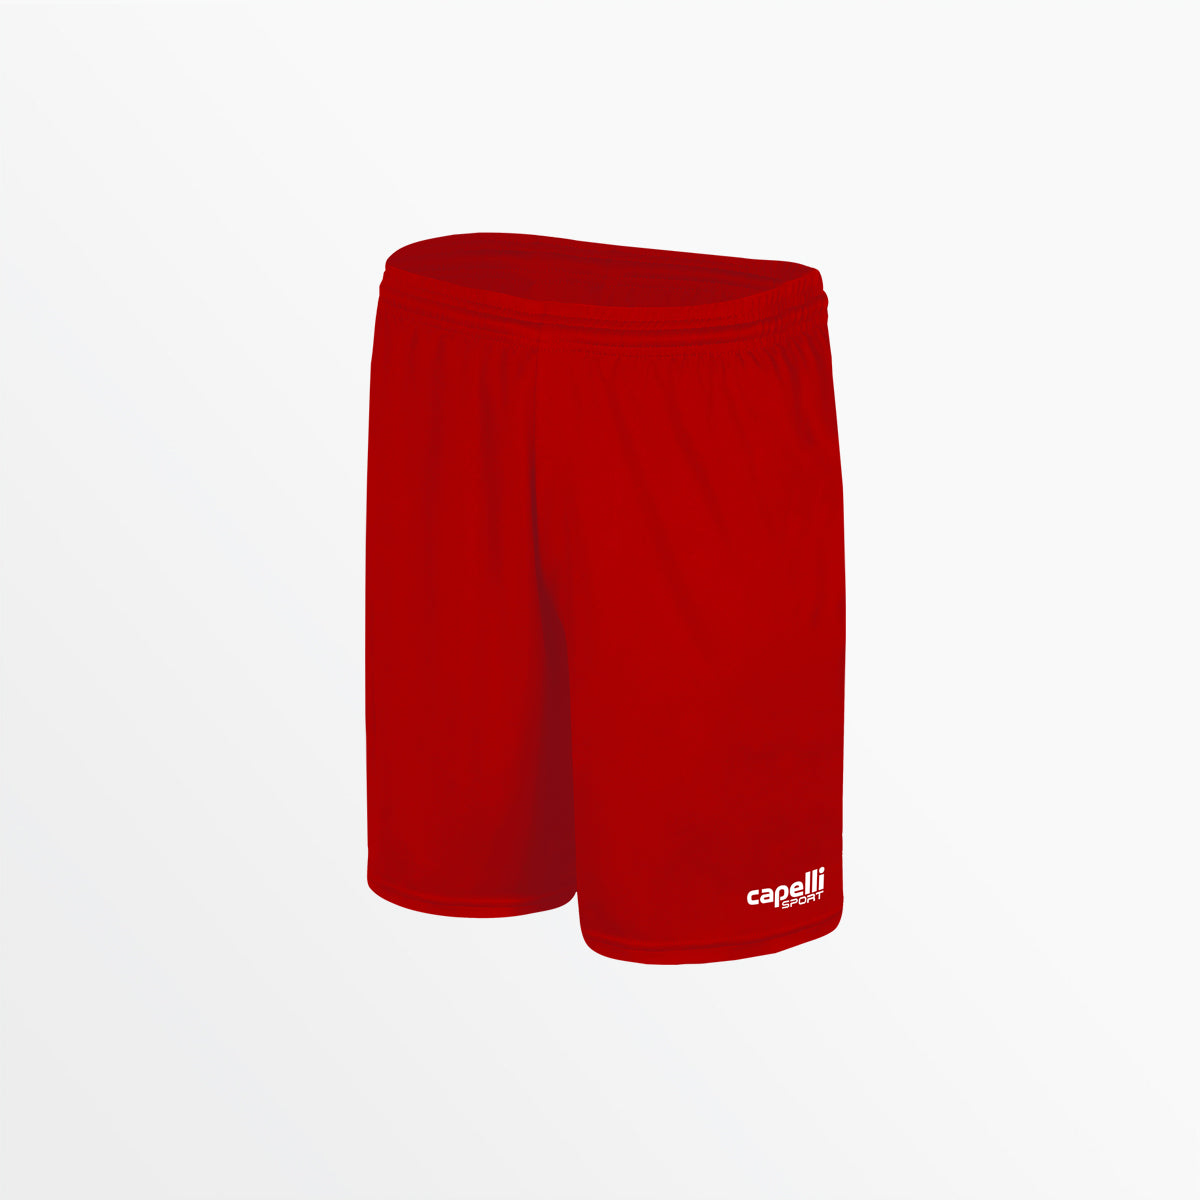 YOUTH TEAM MATCH SHORTS